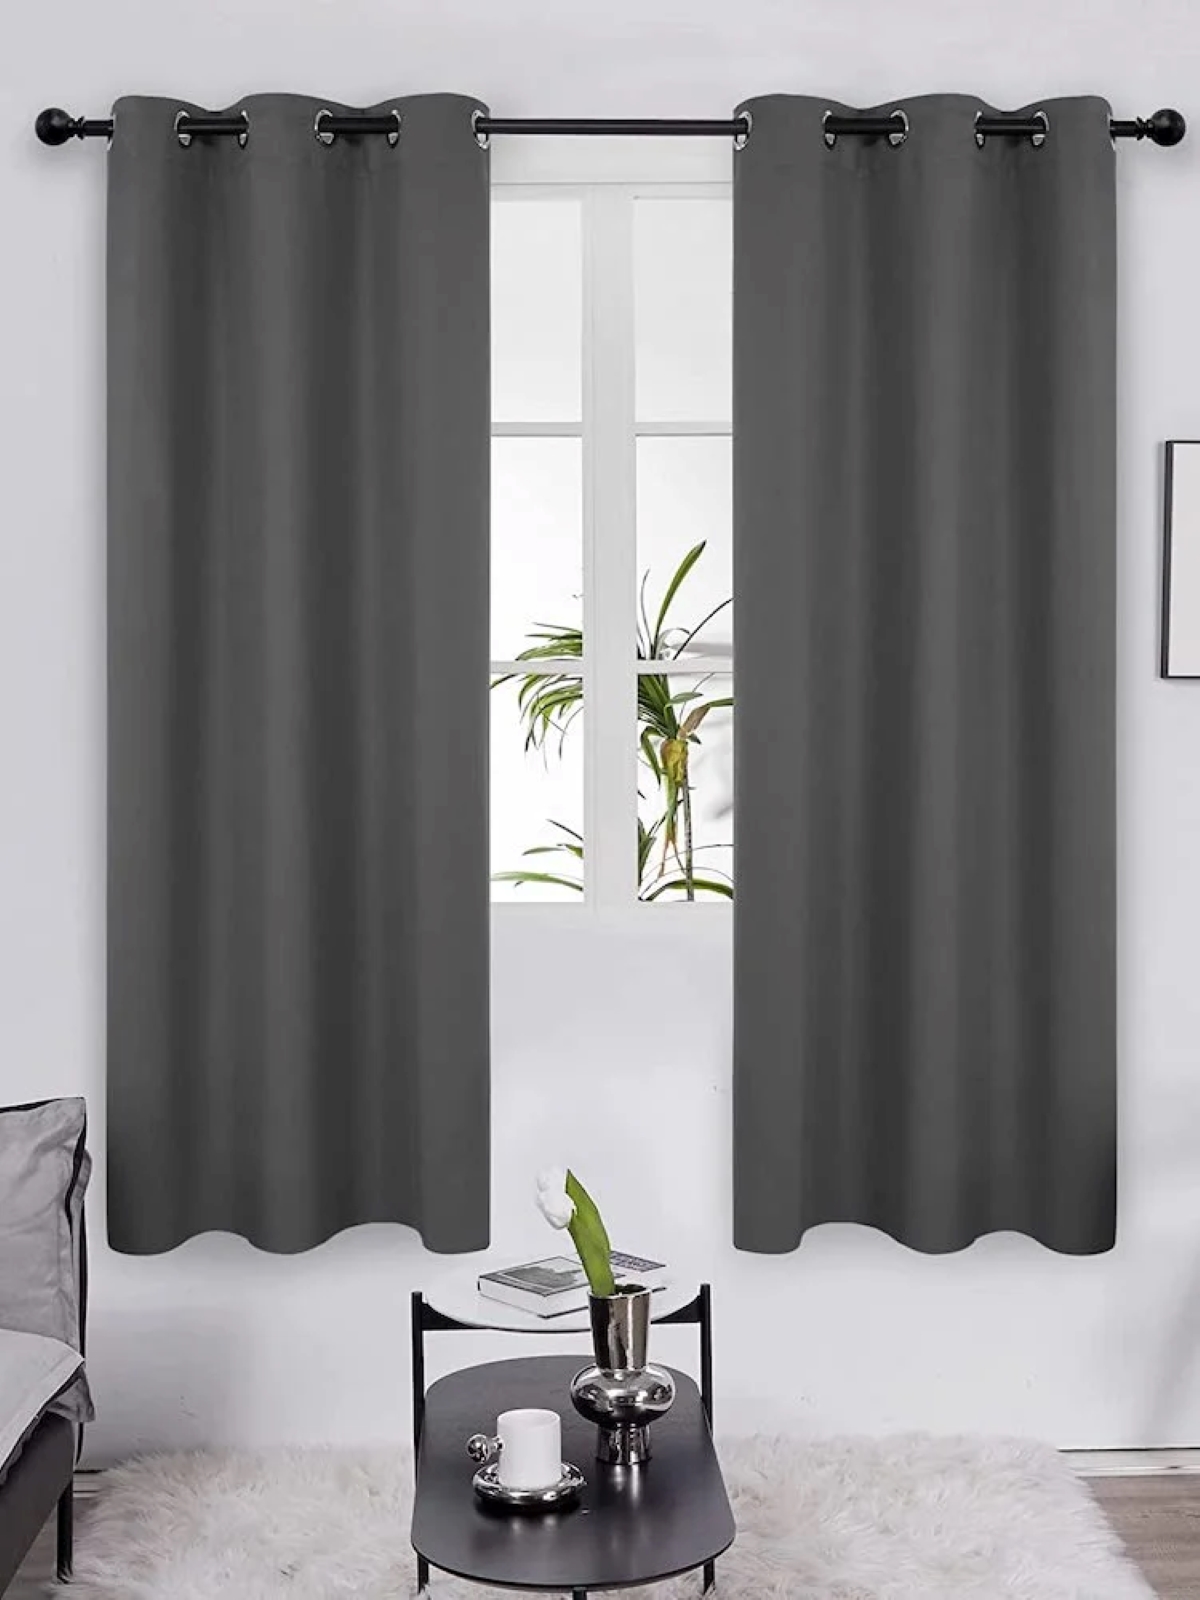 Black thermal curtains in home.